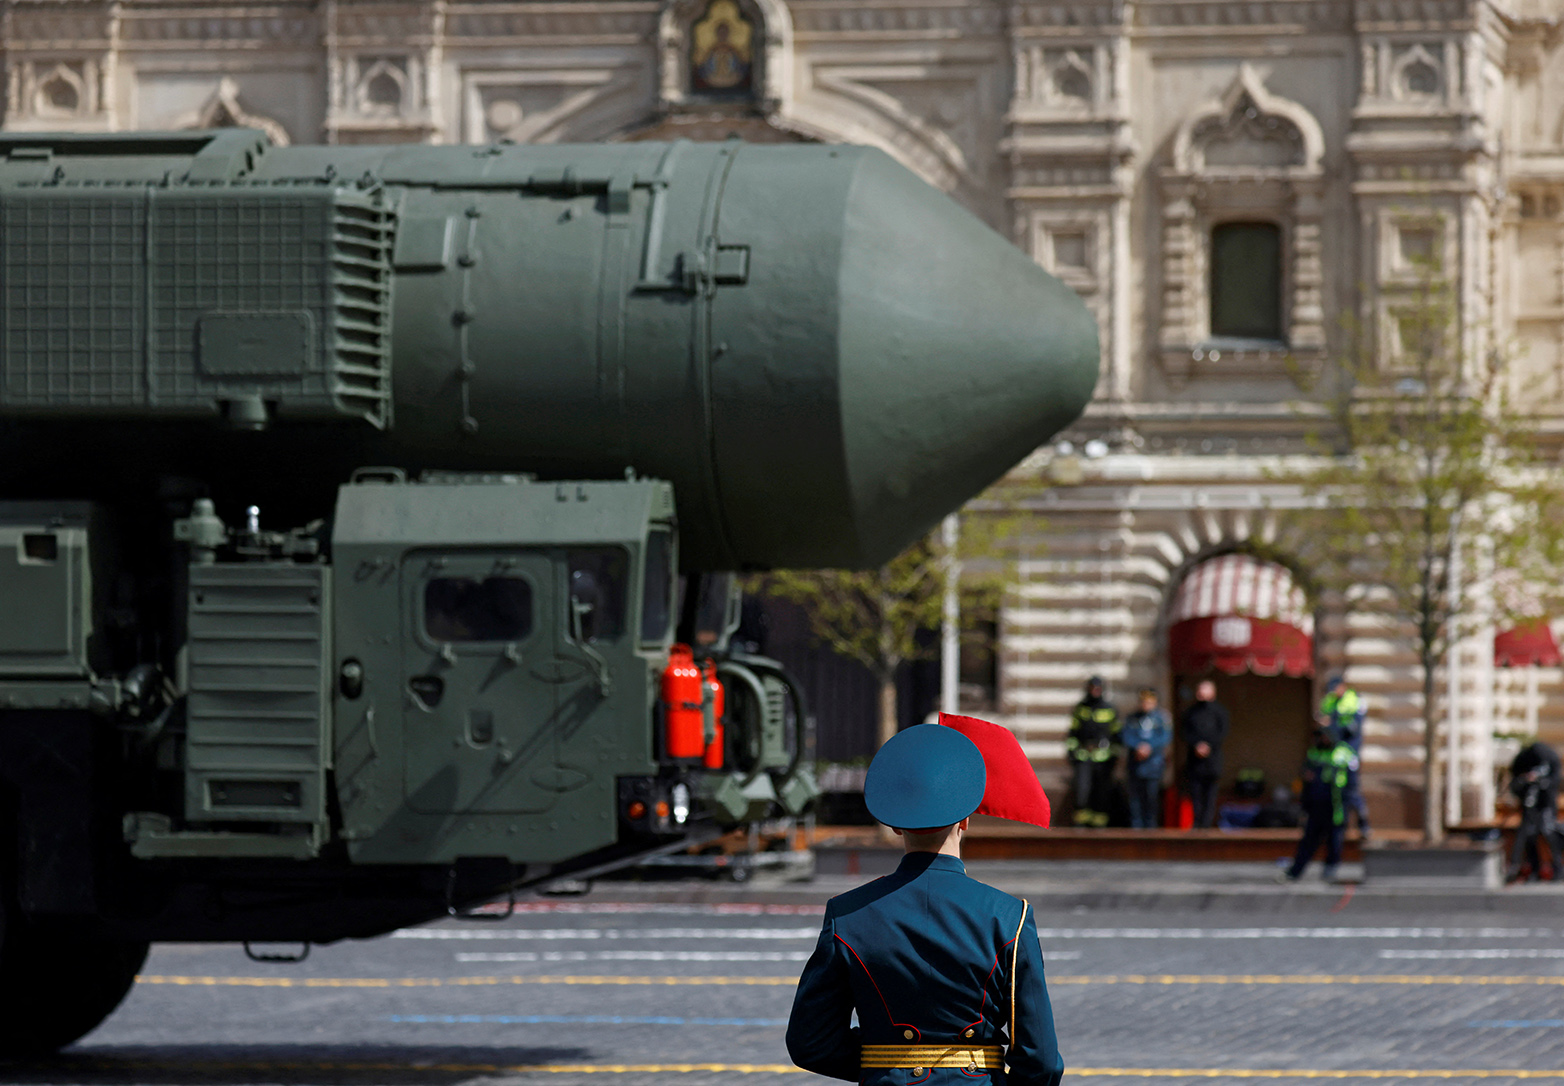 A Russian Yars intercontinental ballistic missile system